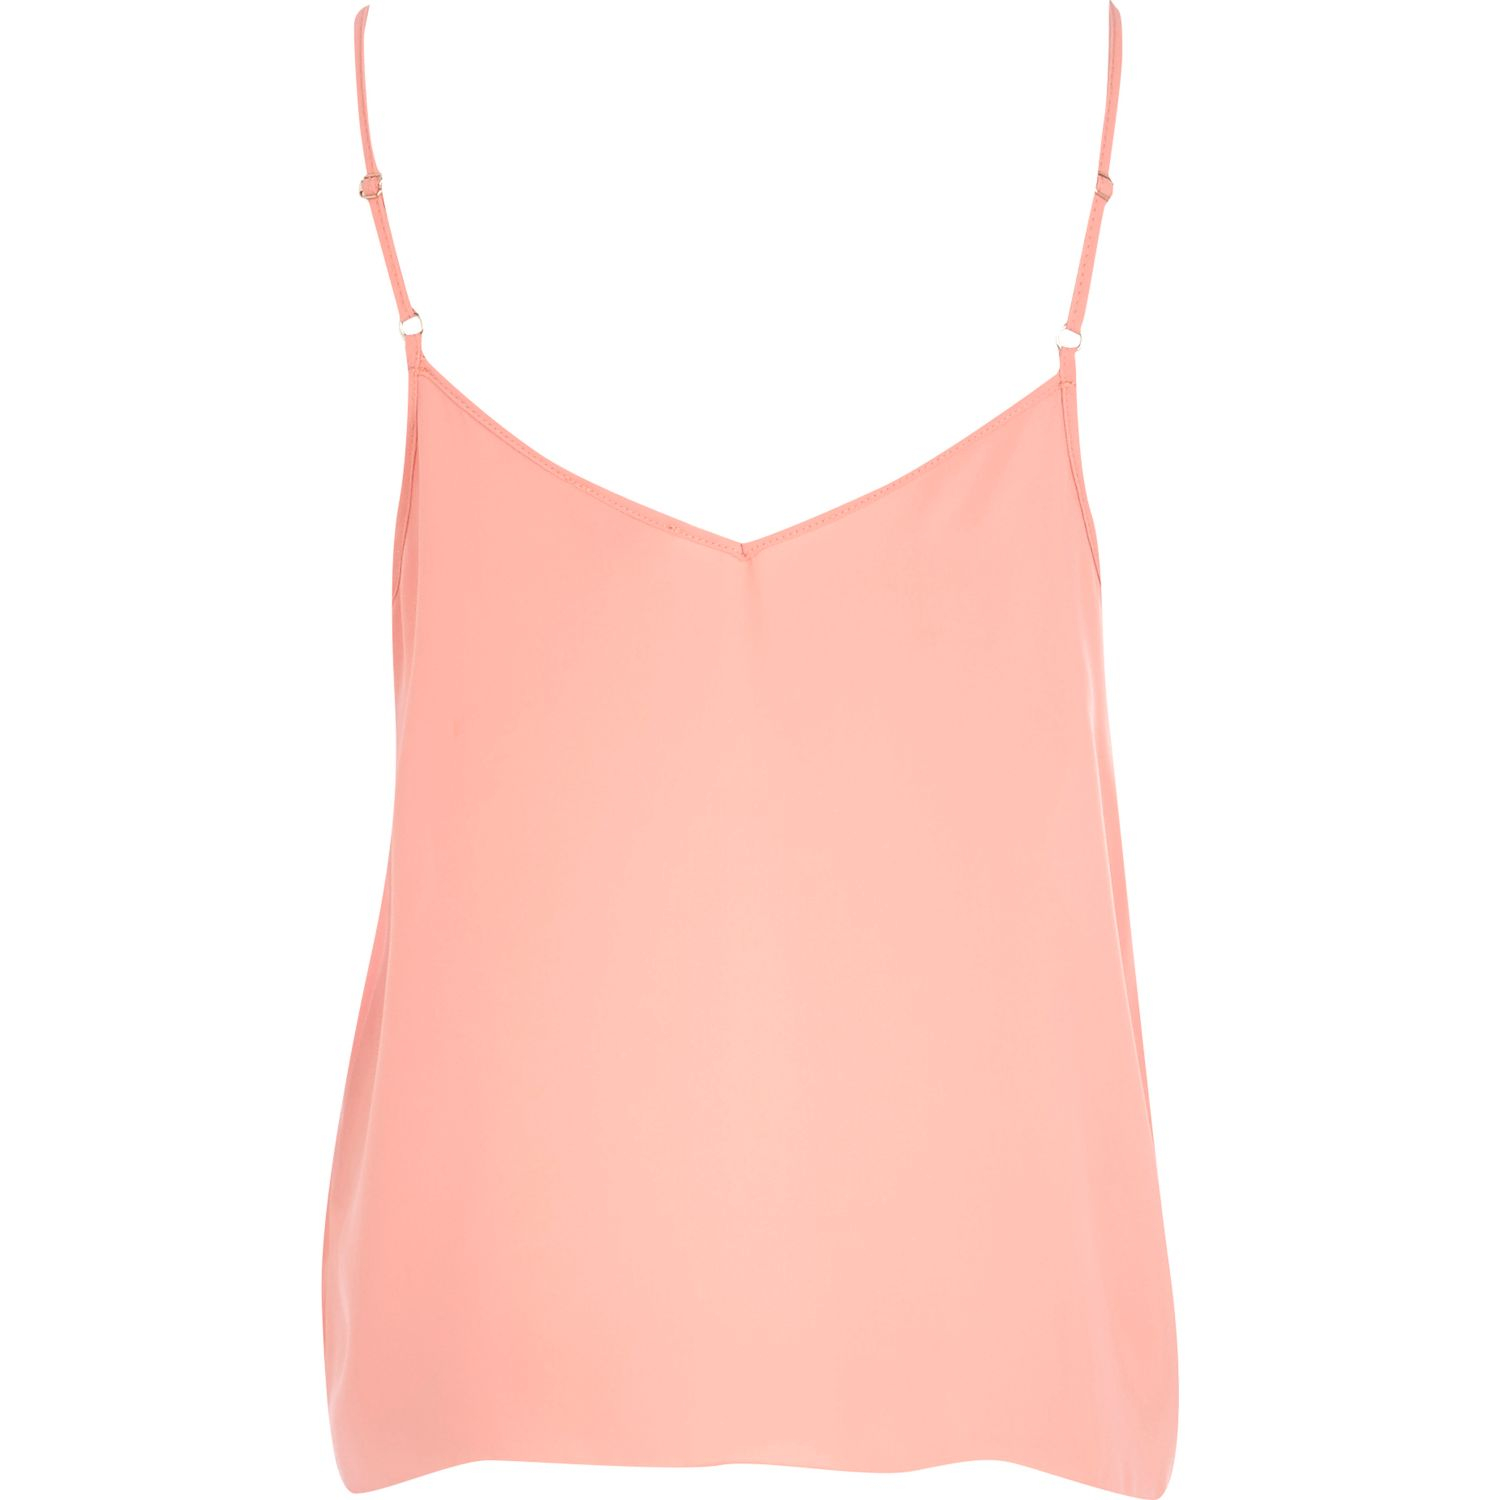 River Island Light Pink Strappy Cami Top in Pink - Lyst